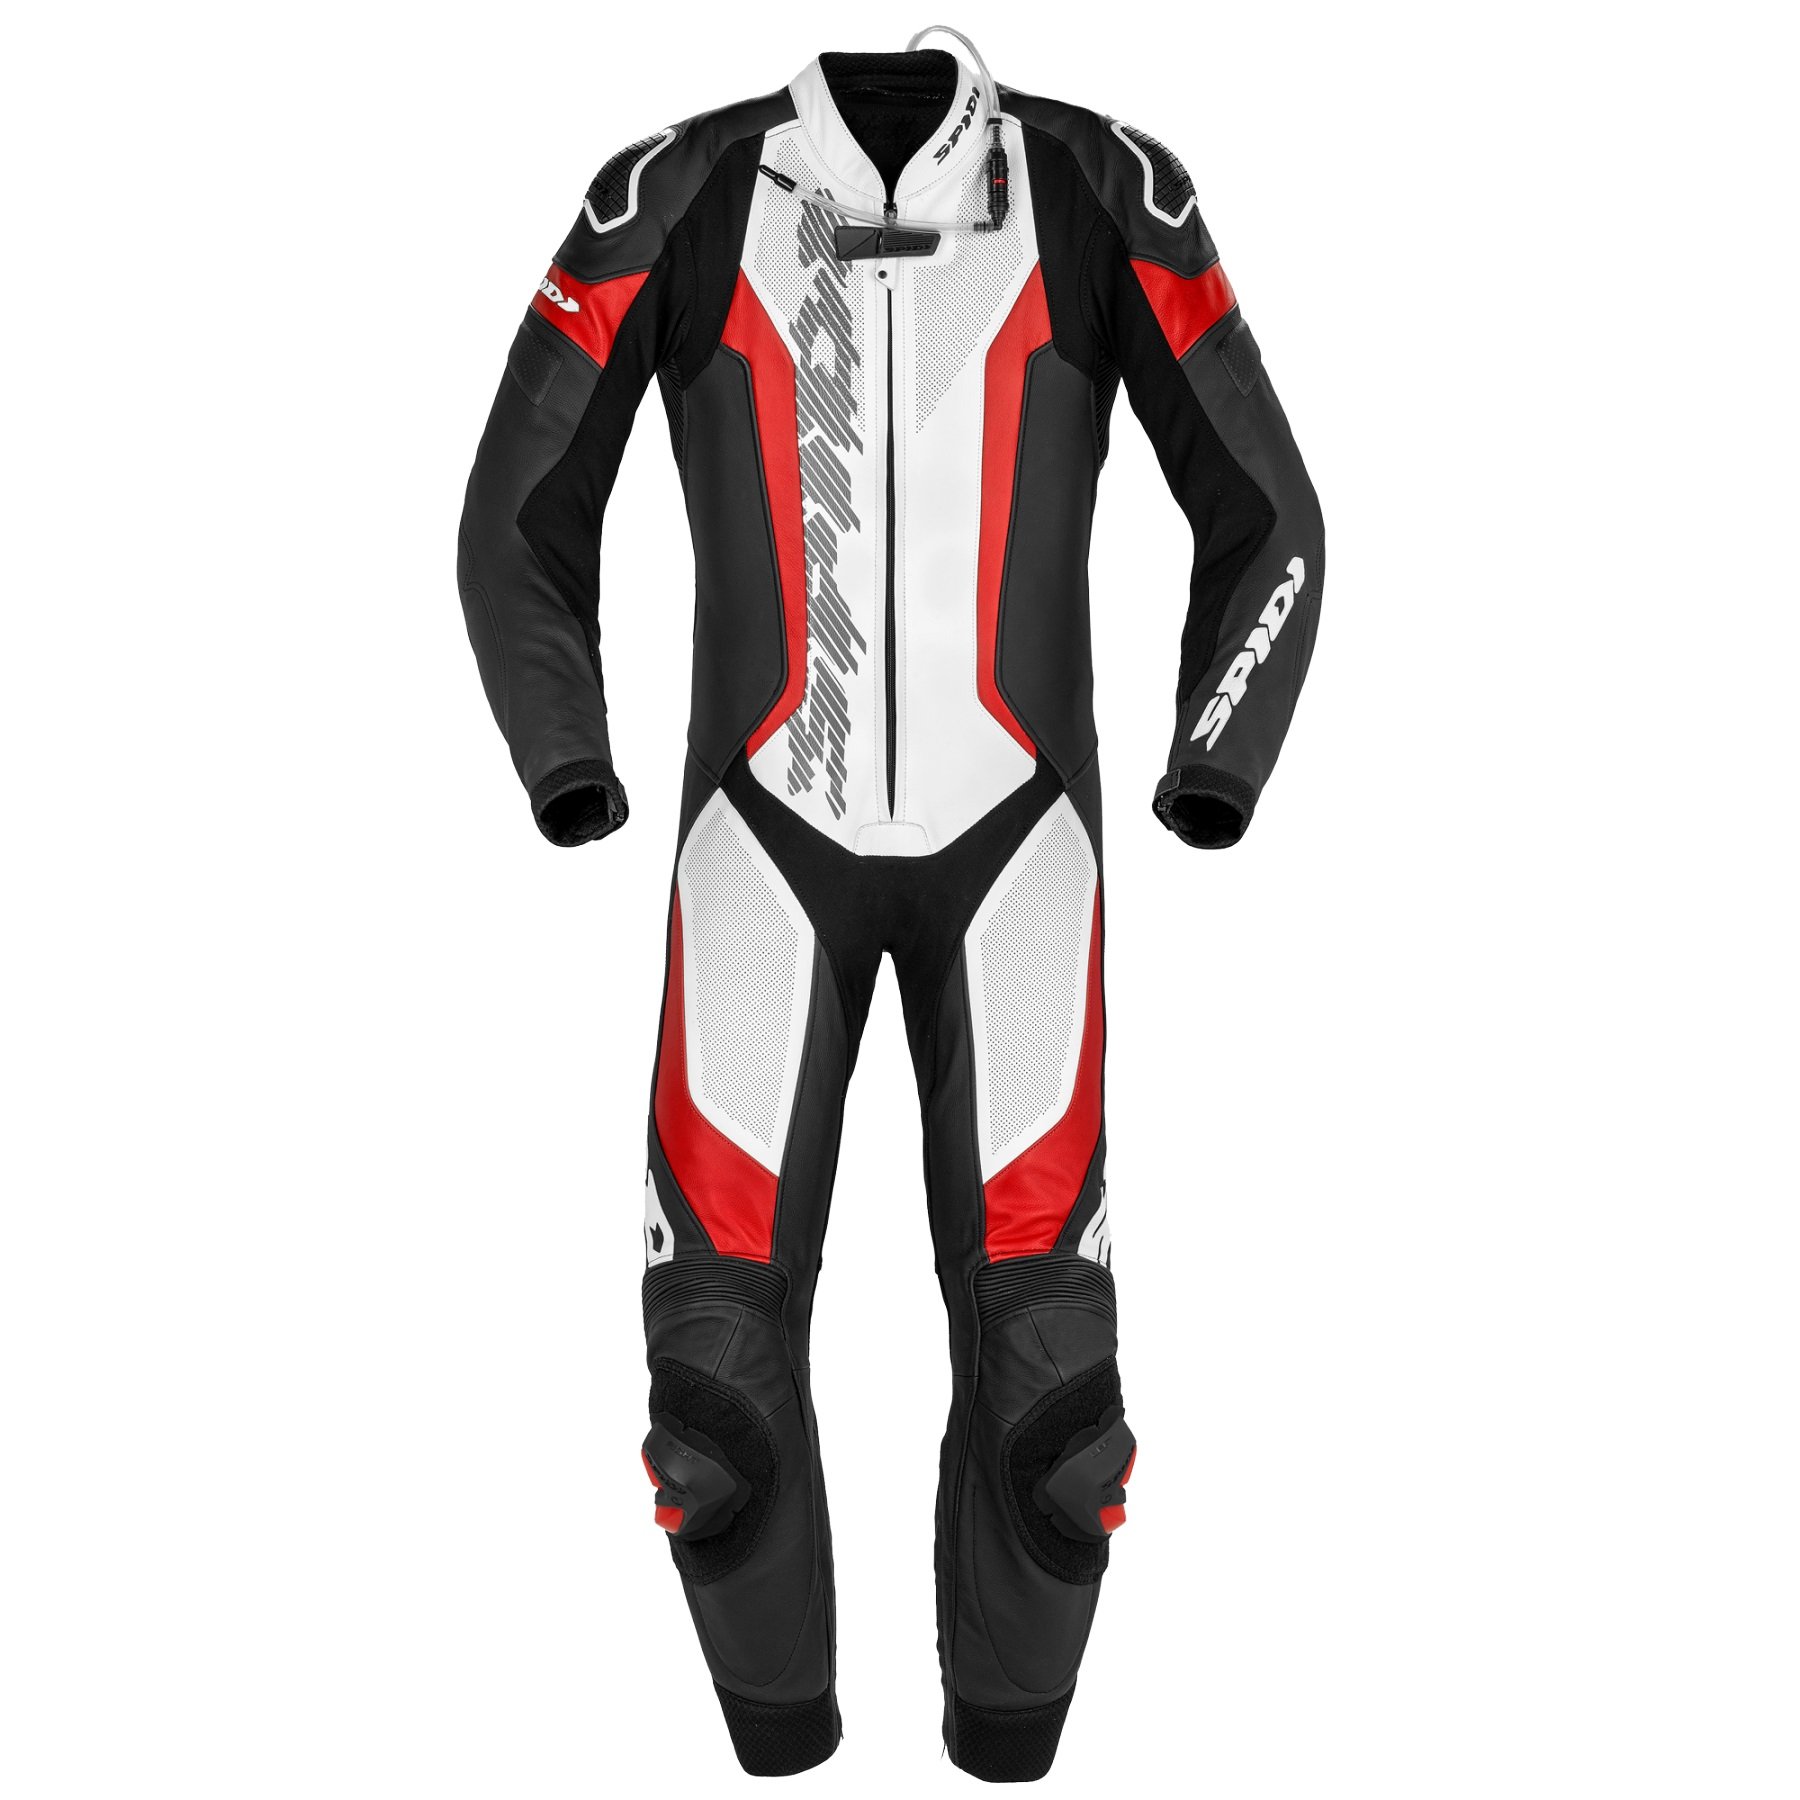 Image of Spidi Laser Pro Perforated Red 1 Piece Motorcycle Racing Suit Talla 50